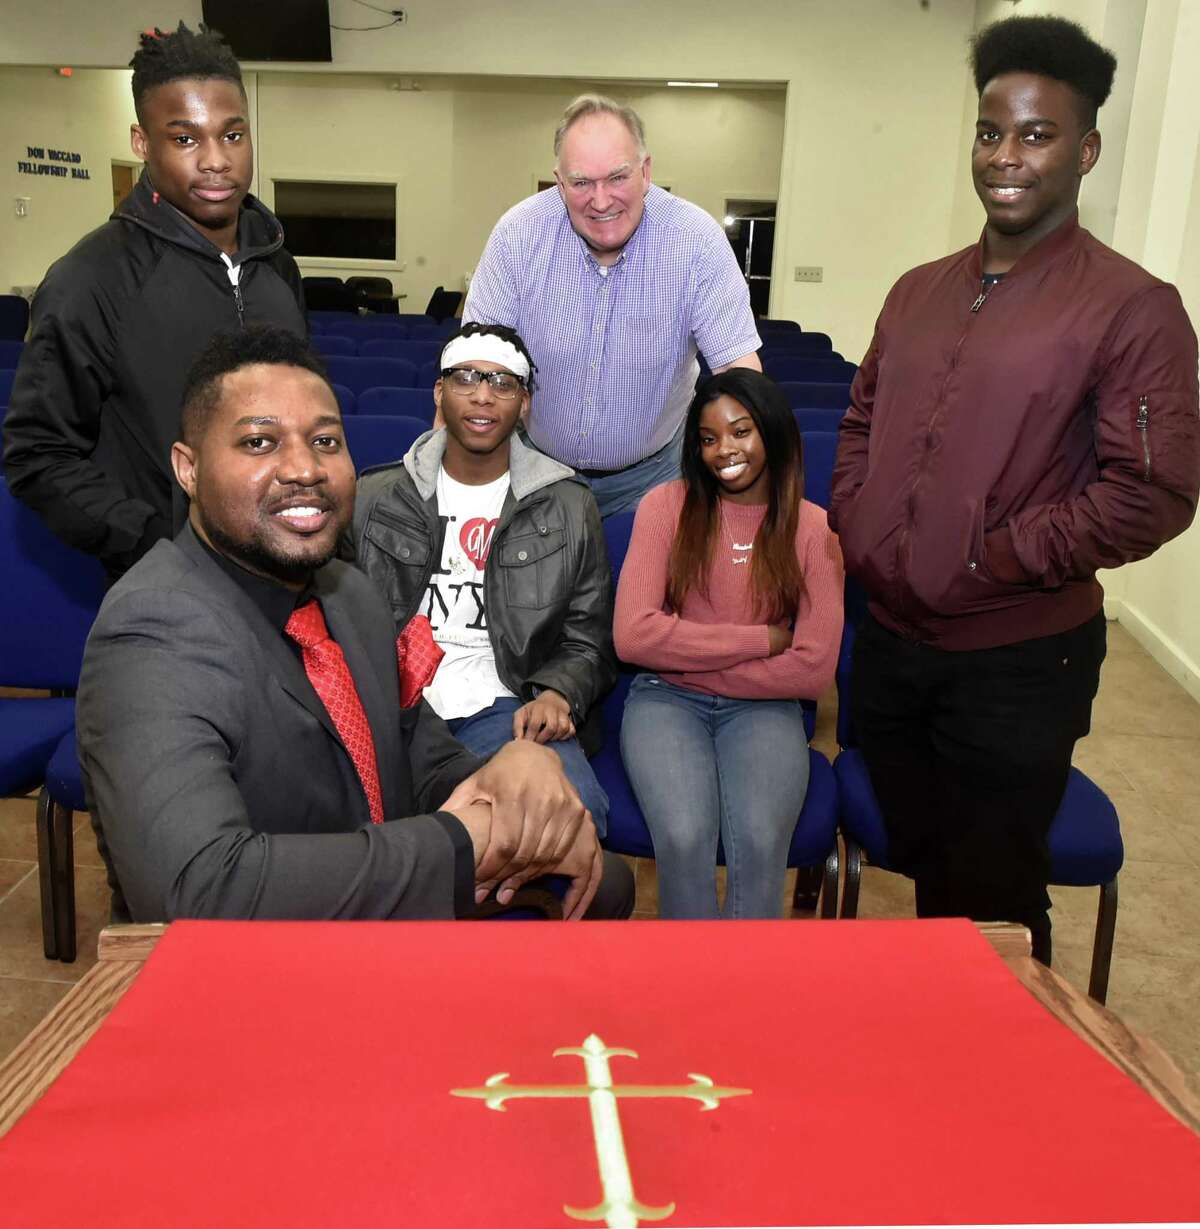 The Rev. Herron Gaston, associate director of admissions and recruitment at Yale Divinity School and senior pastor at Summerfield United Methodist Church in Bridgeport, sitting front, organized Youth with a Purpose, whose members include Kayno Williams, 18, of Bridgeport, standing left, Percy Smith, 19, of New Haven, sitting left, Randene Harris, 17, of New Haven, sitting right, and Thomas James, 19, of New Haven, standing right, and Richard Marquette, center, a New Haven attorney and Yale Divinity School graduate.